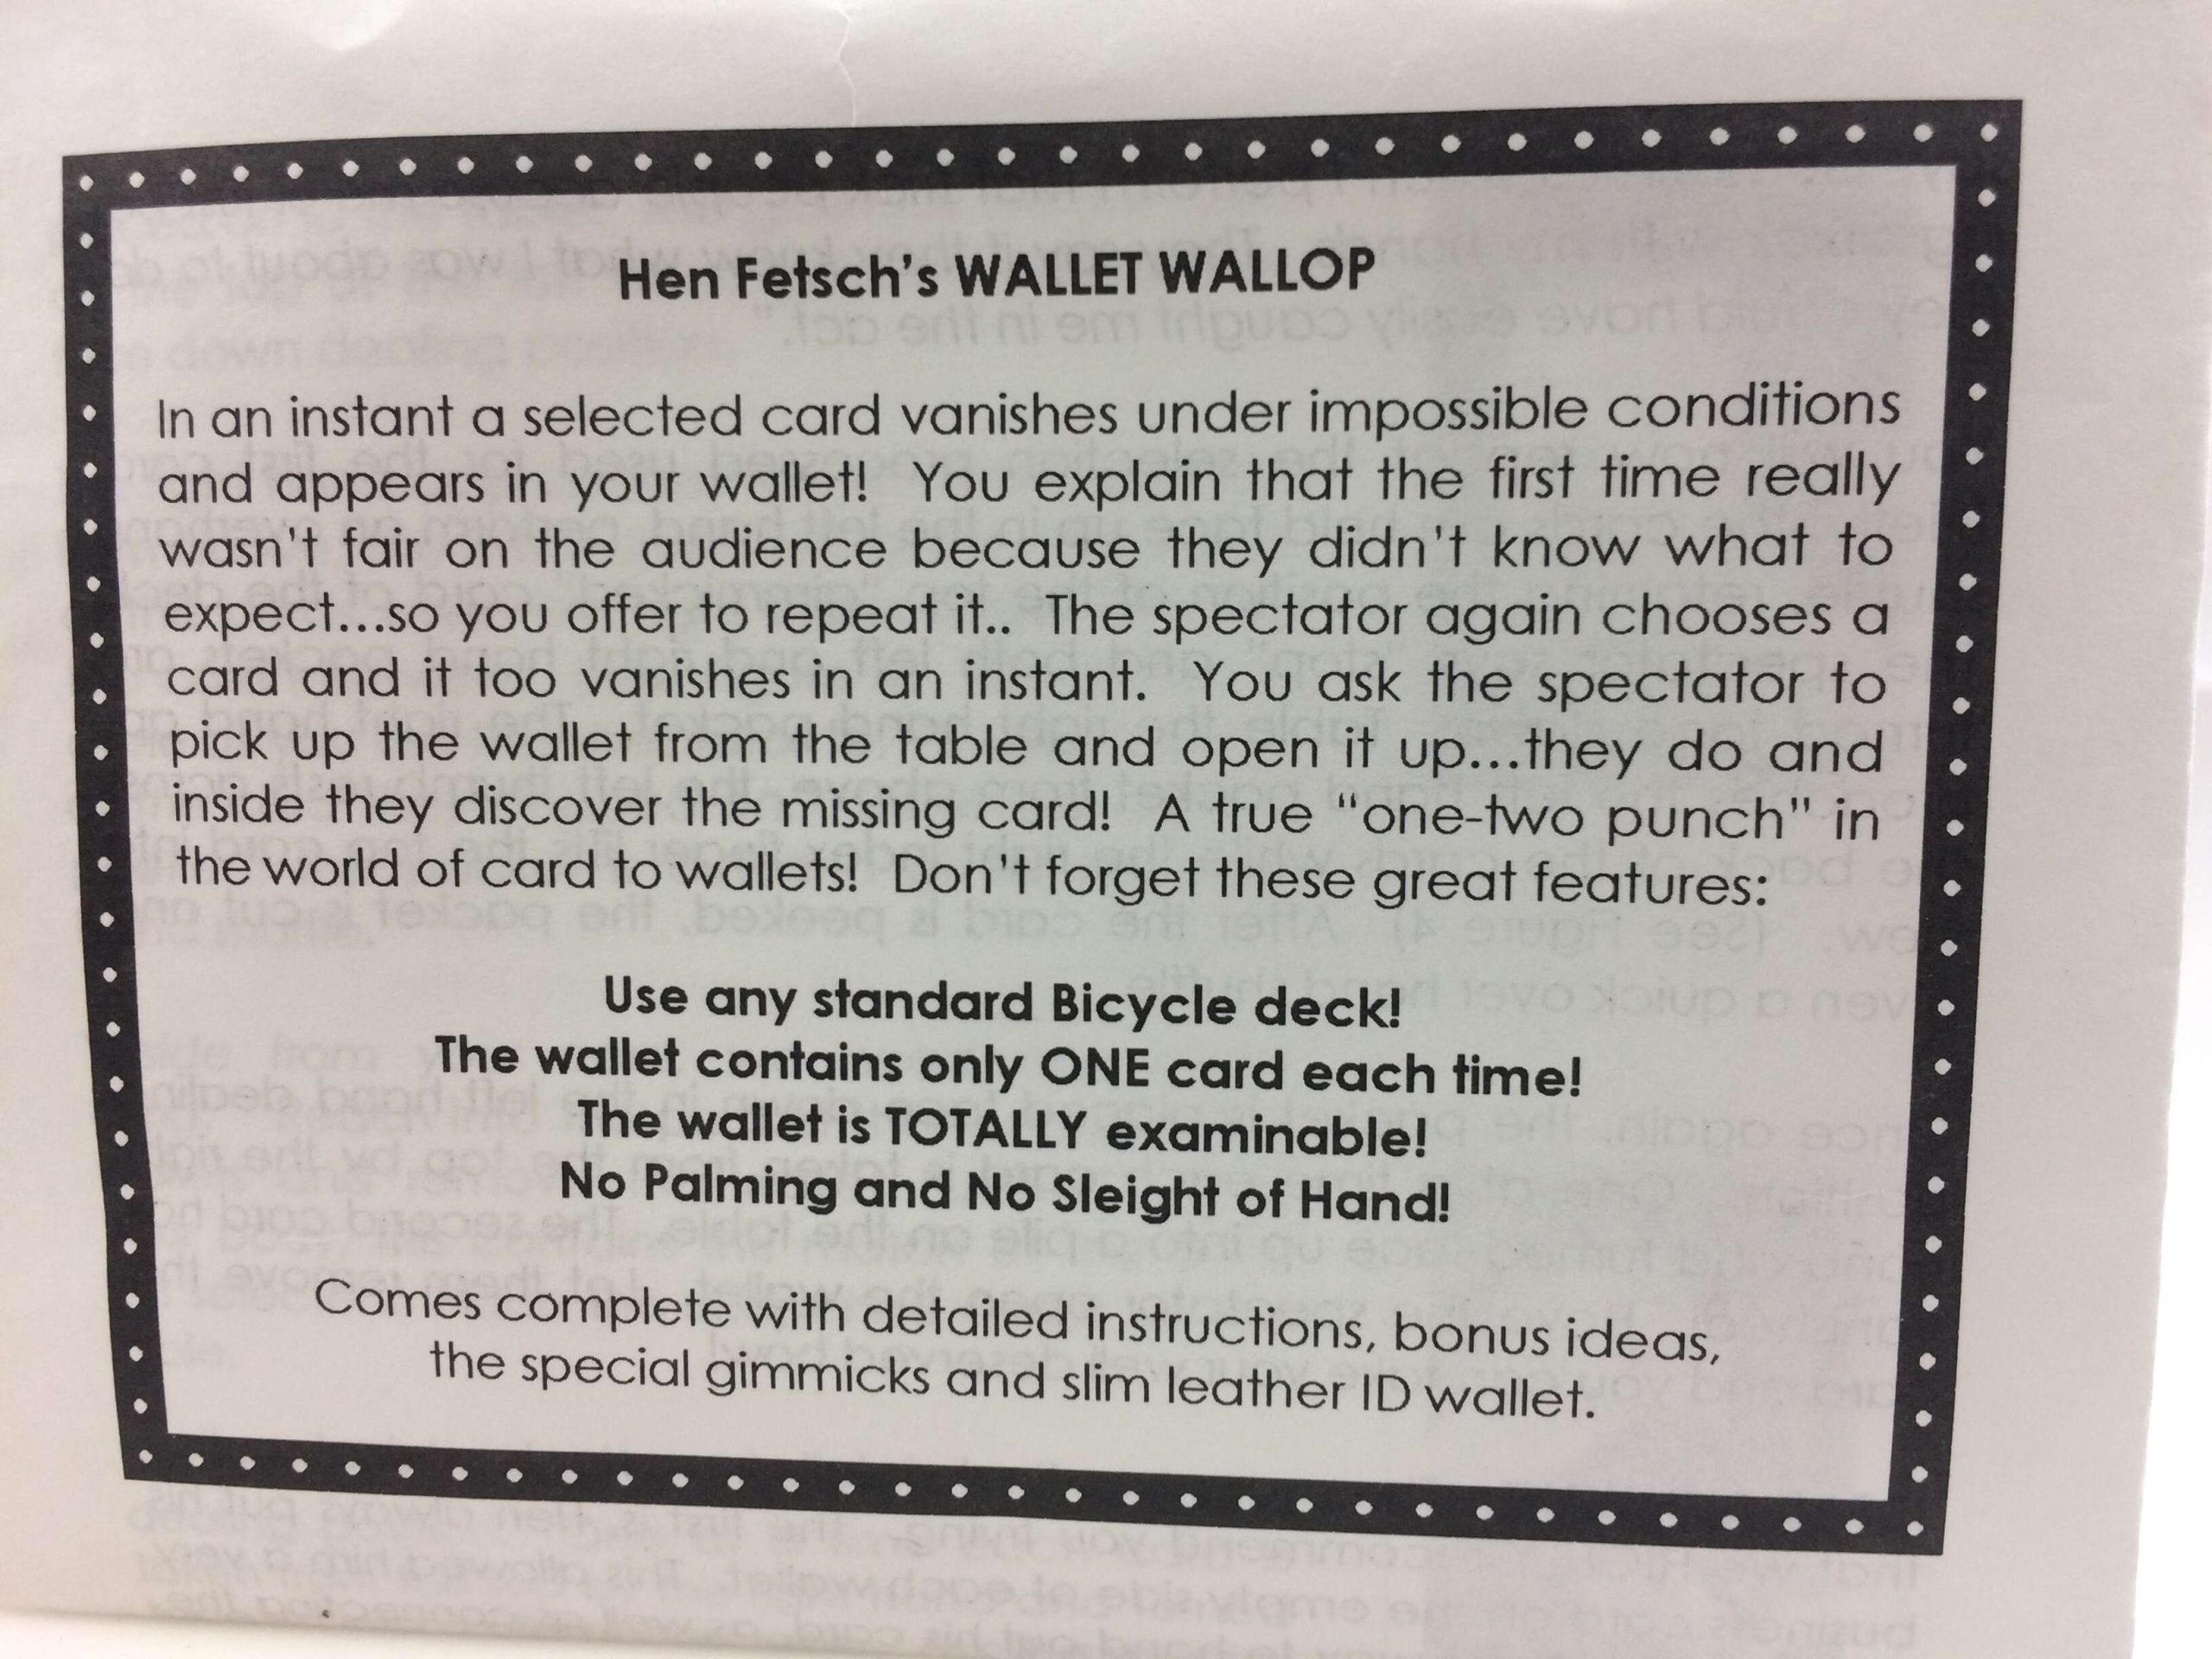 Wallet Wallop Trick by Hen Fetsch back of product packaging